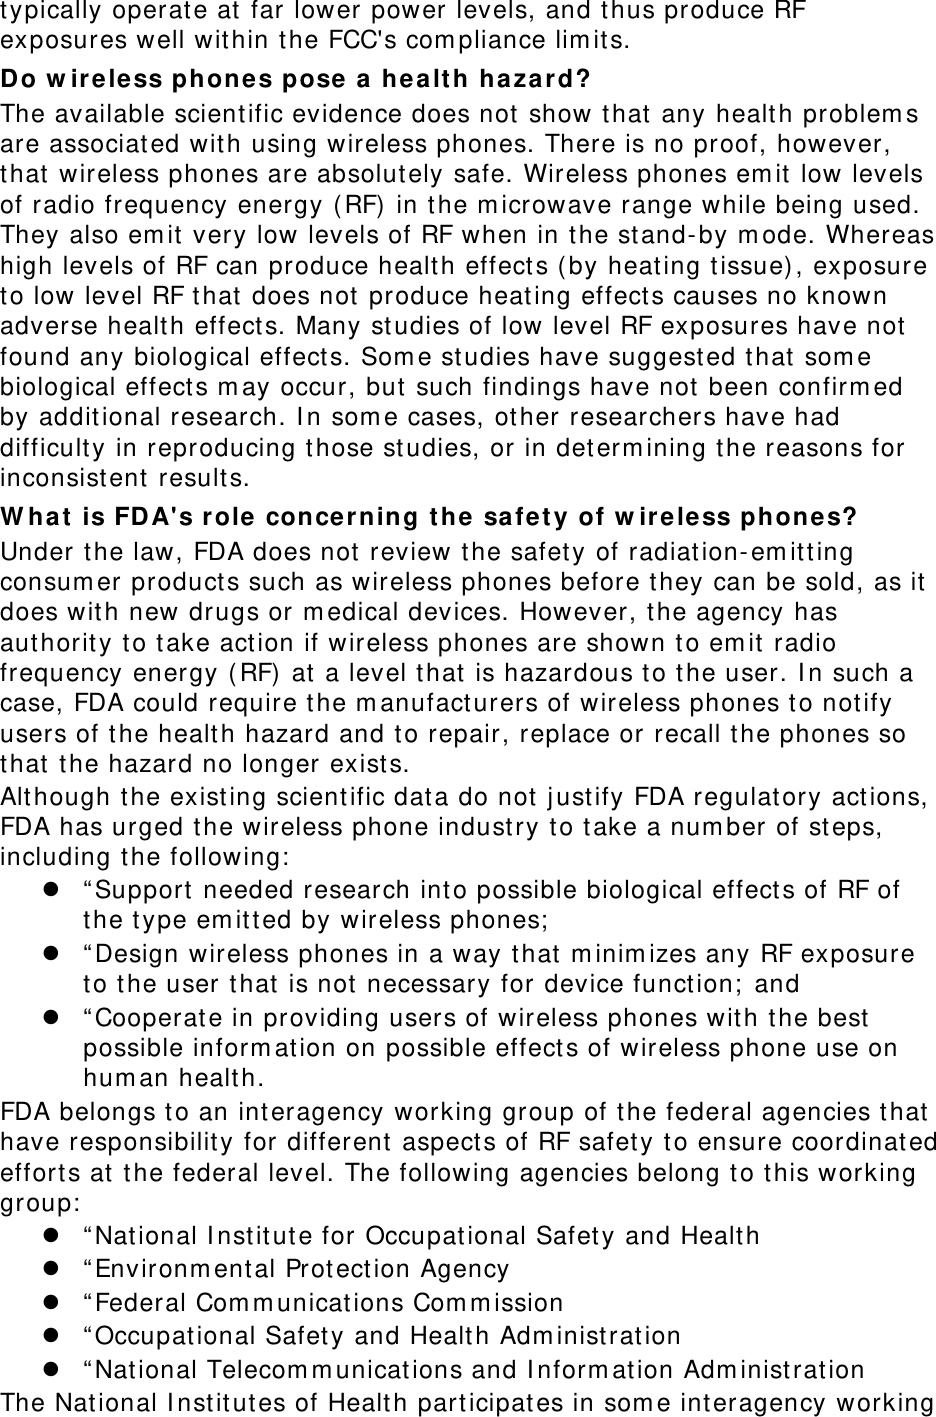 typically operate at far lower power levels, and t hus produce RF exposures well wit hin t he FCC&apos;s com pliance lim its. Do w ireless phones pose a  hea lt h ha za r d? The available scient ific evidence does not  show t hat any health problem s are associat ed with using wireless phones. There is no proof, however, that wireless phones are absolutely safe. Wireless phones em it low levels of radio frequency energy ( RF)  in t he m icrowave range while being used. They also em it very low levels of RF when in the stand- by m ode. Whereas high levels of RF can produce health effect s ( by heating t issue), exposure to low level RF that does not produce heat ing effect s causes no known adverse health effect s. Many st udies of low level RF exposures have not  found any biological effect s. Som e studies have suggest ed t hat  som e biological effect s m ay occur, but such findings have not been confirm ed by additional research. I n som e cases, ot her researchers have had difficulty in reproducing t hose studies, or in determ ining t he reasons for inconsistent results. W hat is FDA&apos;s r ole concerning the  sa fe t y of w ireless phon es? Under the law, FDA does not review t he safet y of radiat ion-em it t ing consum er product s such as wireless phones before they can be sold, as it does wit h new drugs or m edical devices. However, the agency has aut hority t o t ake action if wireless phones are shown t o em it  radio frequency energy ( RF)  at a level that is hazardous t o t he user. I n such a case, FDA could require the m anufact urers of wireless phones t o notify users of the health hazard and t o repair, replace or recall the phones so that t he hazard no longer exist s. Alt hough the existing scient ific data do not j ust ify FDA regulat ory act ions, FDA has urged t he wireless phone indust ry t o t ake a num ber of st eps, including t he following:   “ Support  needed research into possible biological effect s of RF of the type em it t ed by wireless phones;   “ Design wireless phones in a way that m inim izes any RF exposure to the user t hat  is not necessary for device function;  and  “ Cooperate in providing users of wireless phones with t he best  possible inform ation on possible effect s of wireless phone use on hum an healt h. FDA belongs to an int eragency working group of the federal agencies t hat have responsibilit y for different  aspect s of RF safet y to ensure coordinated efforts at the federal level. The following agencies belong to t his working group:   “ National I nst itut e for Occupat ional Safety and Healt h  “ Environm ental Prot ect ion Agency  “ Federal Com m unicat ions Com m ission  “ Occupat ional Safet y and Health Adm inist ration  “ National Telecom m unications and I nform ation Adm inist ration The National I nst itut es of Health part icipates in som e int eragency working 